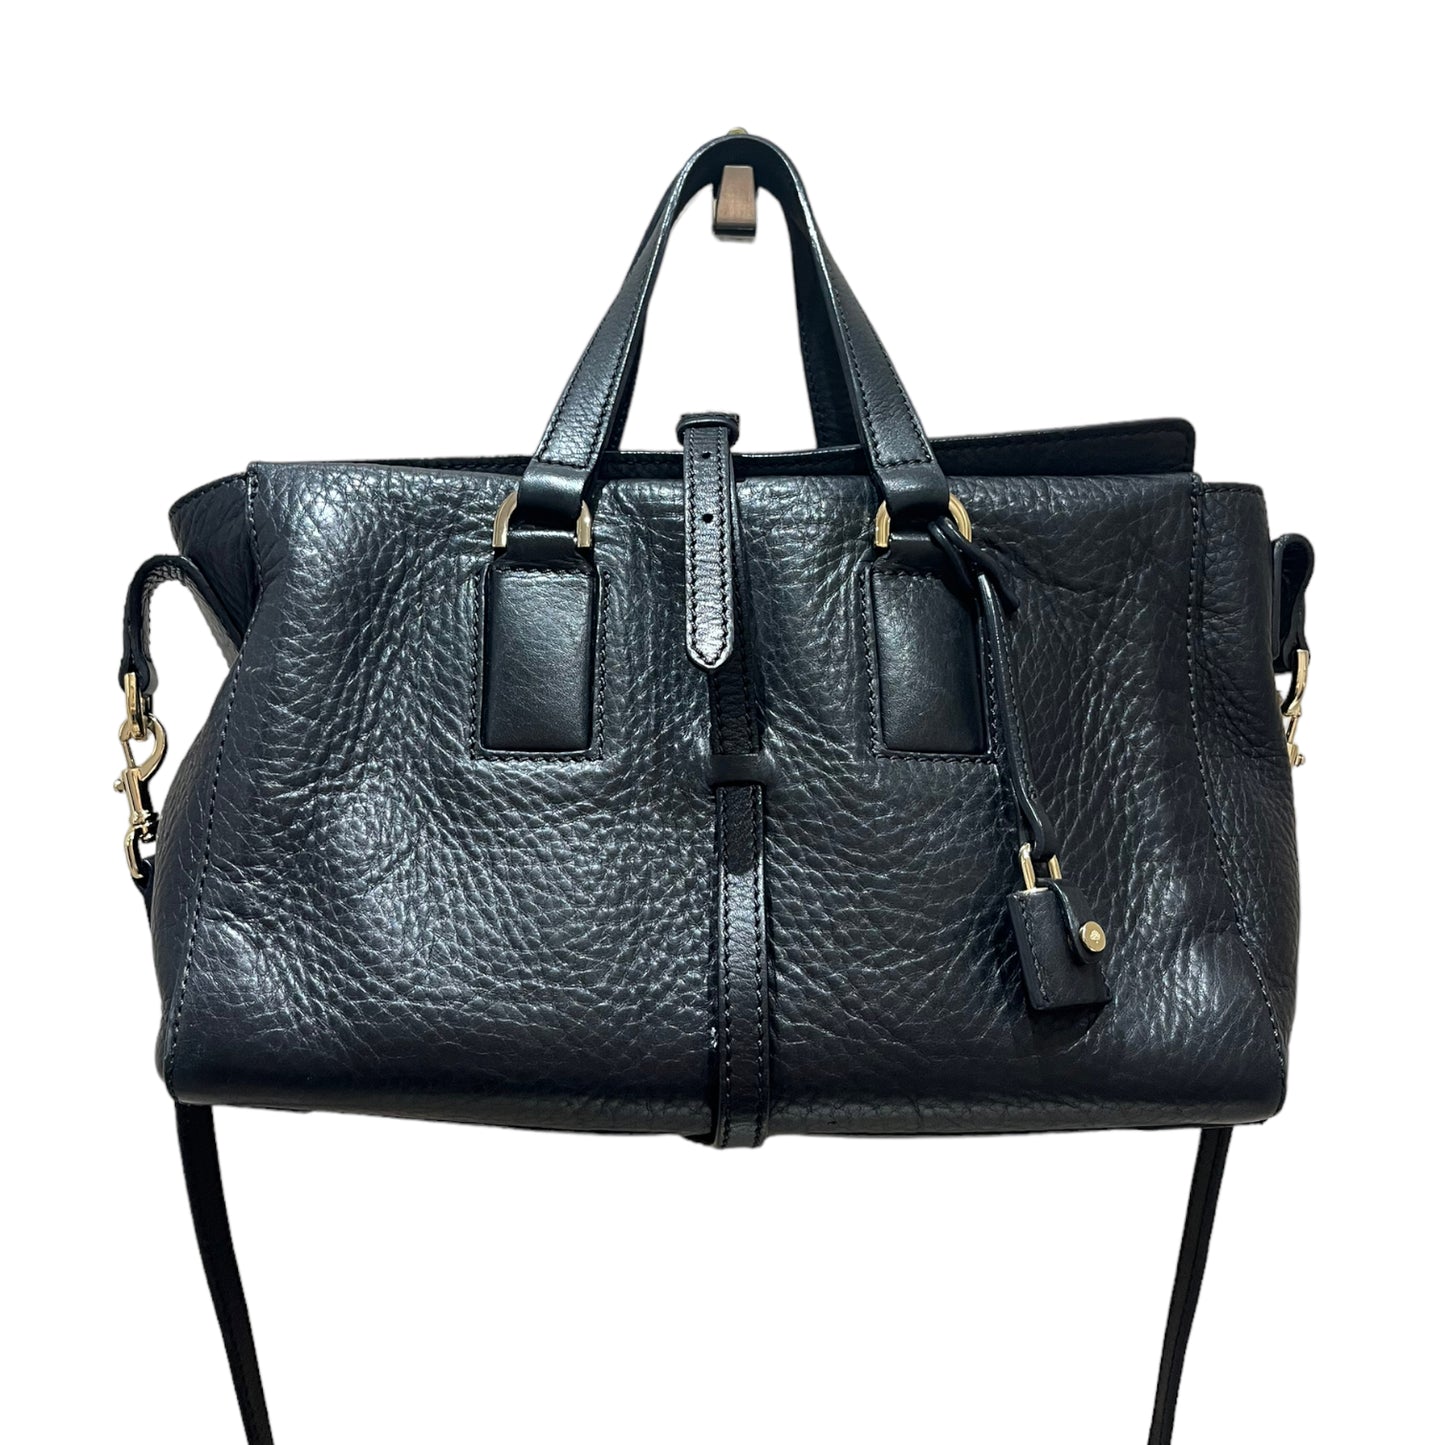 Mulberry Black Roxette Bag